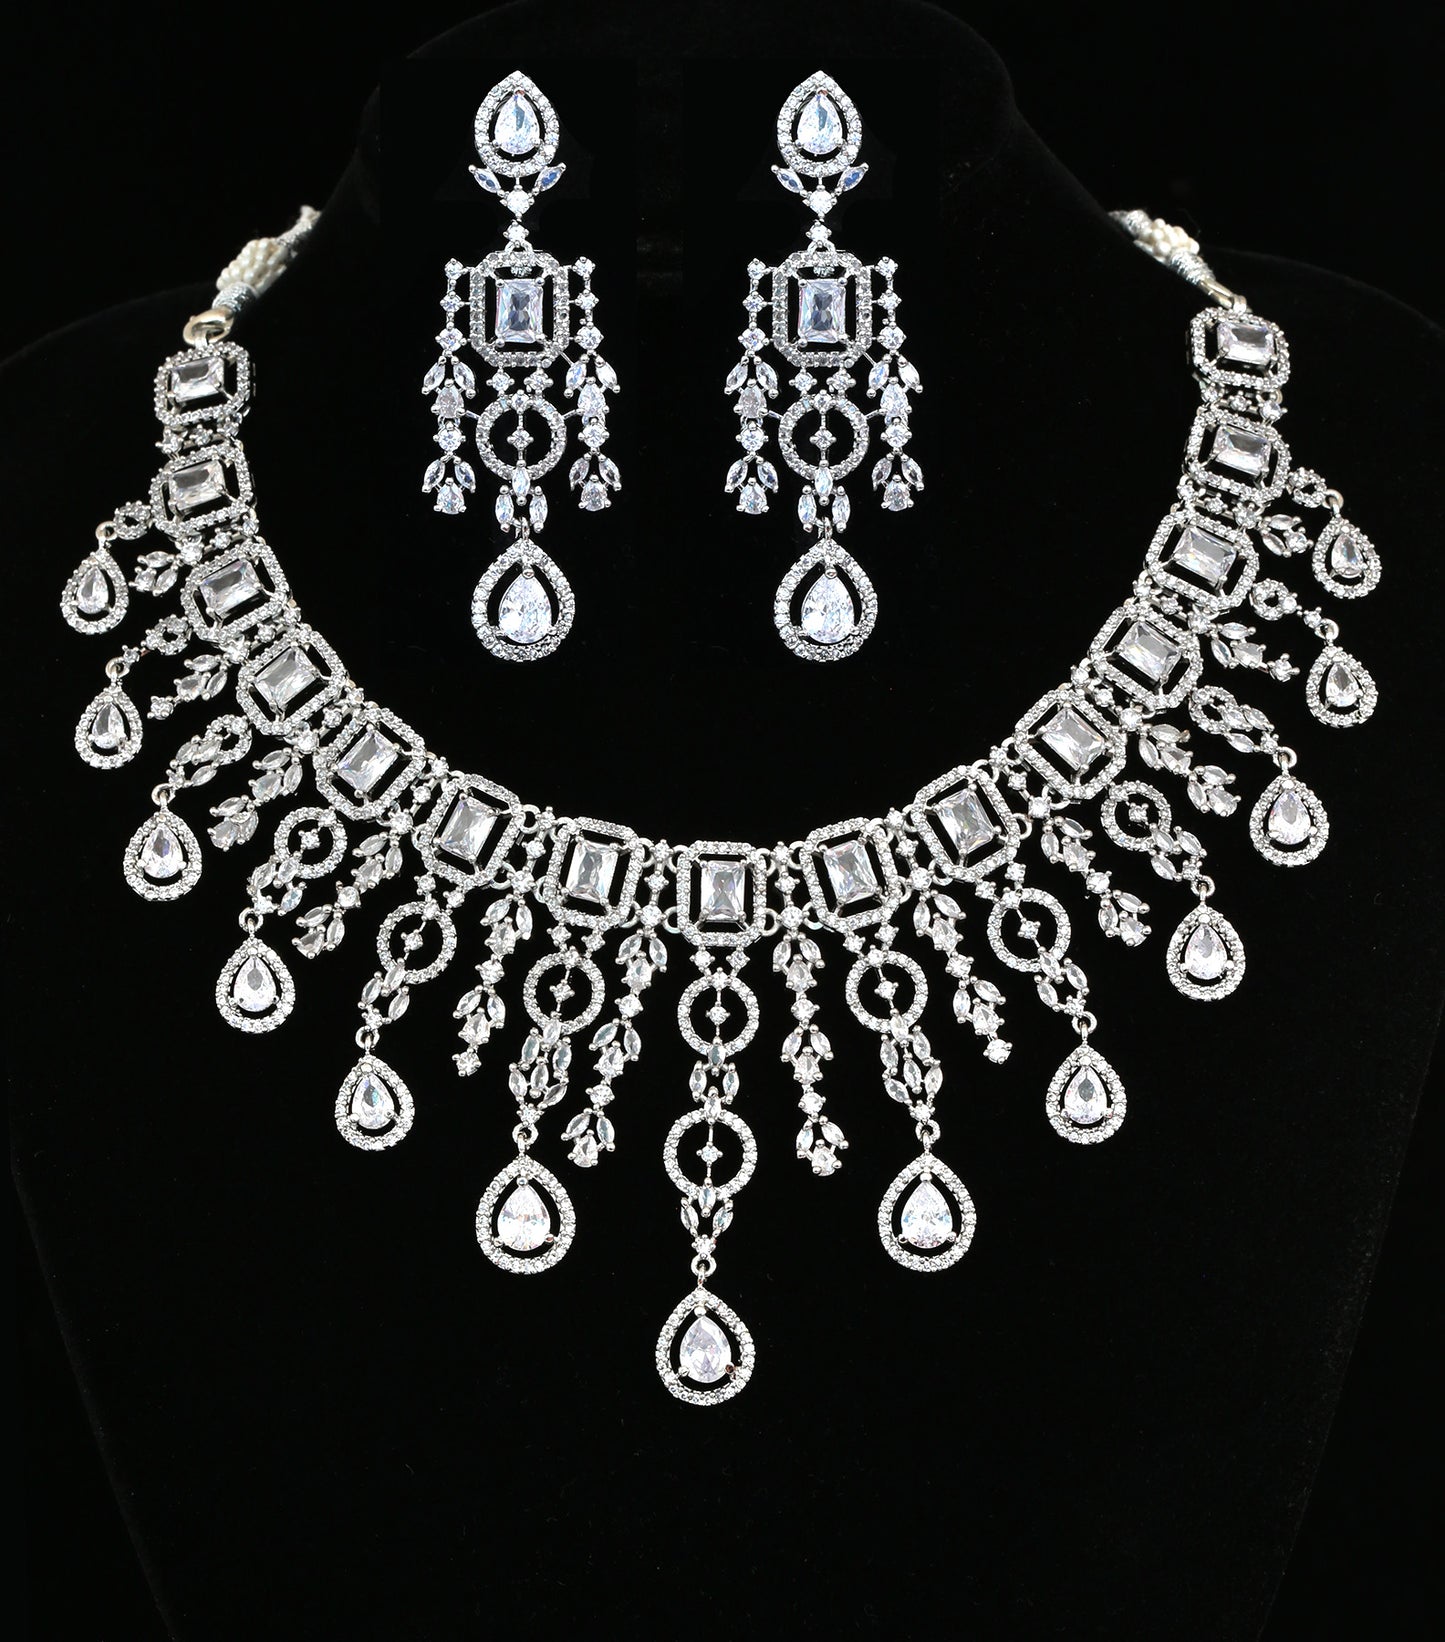 American Diamond Silver Wedding Necklace Earring set | Pink CZ Stone Indian Jewelry | Mint Green Statement Necklace | Indian Designs Jewelry